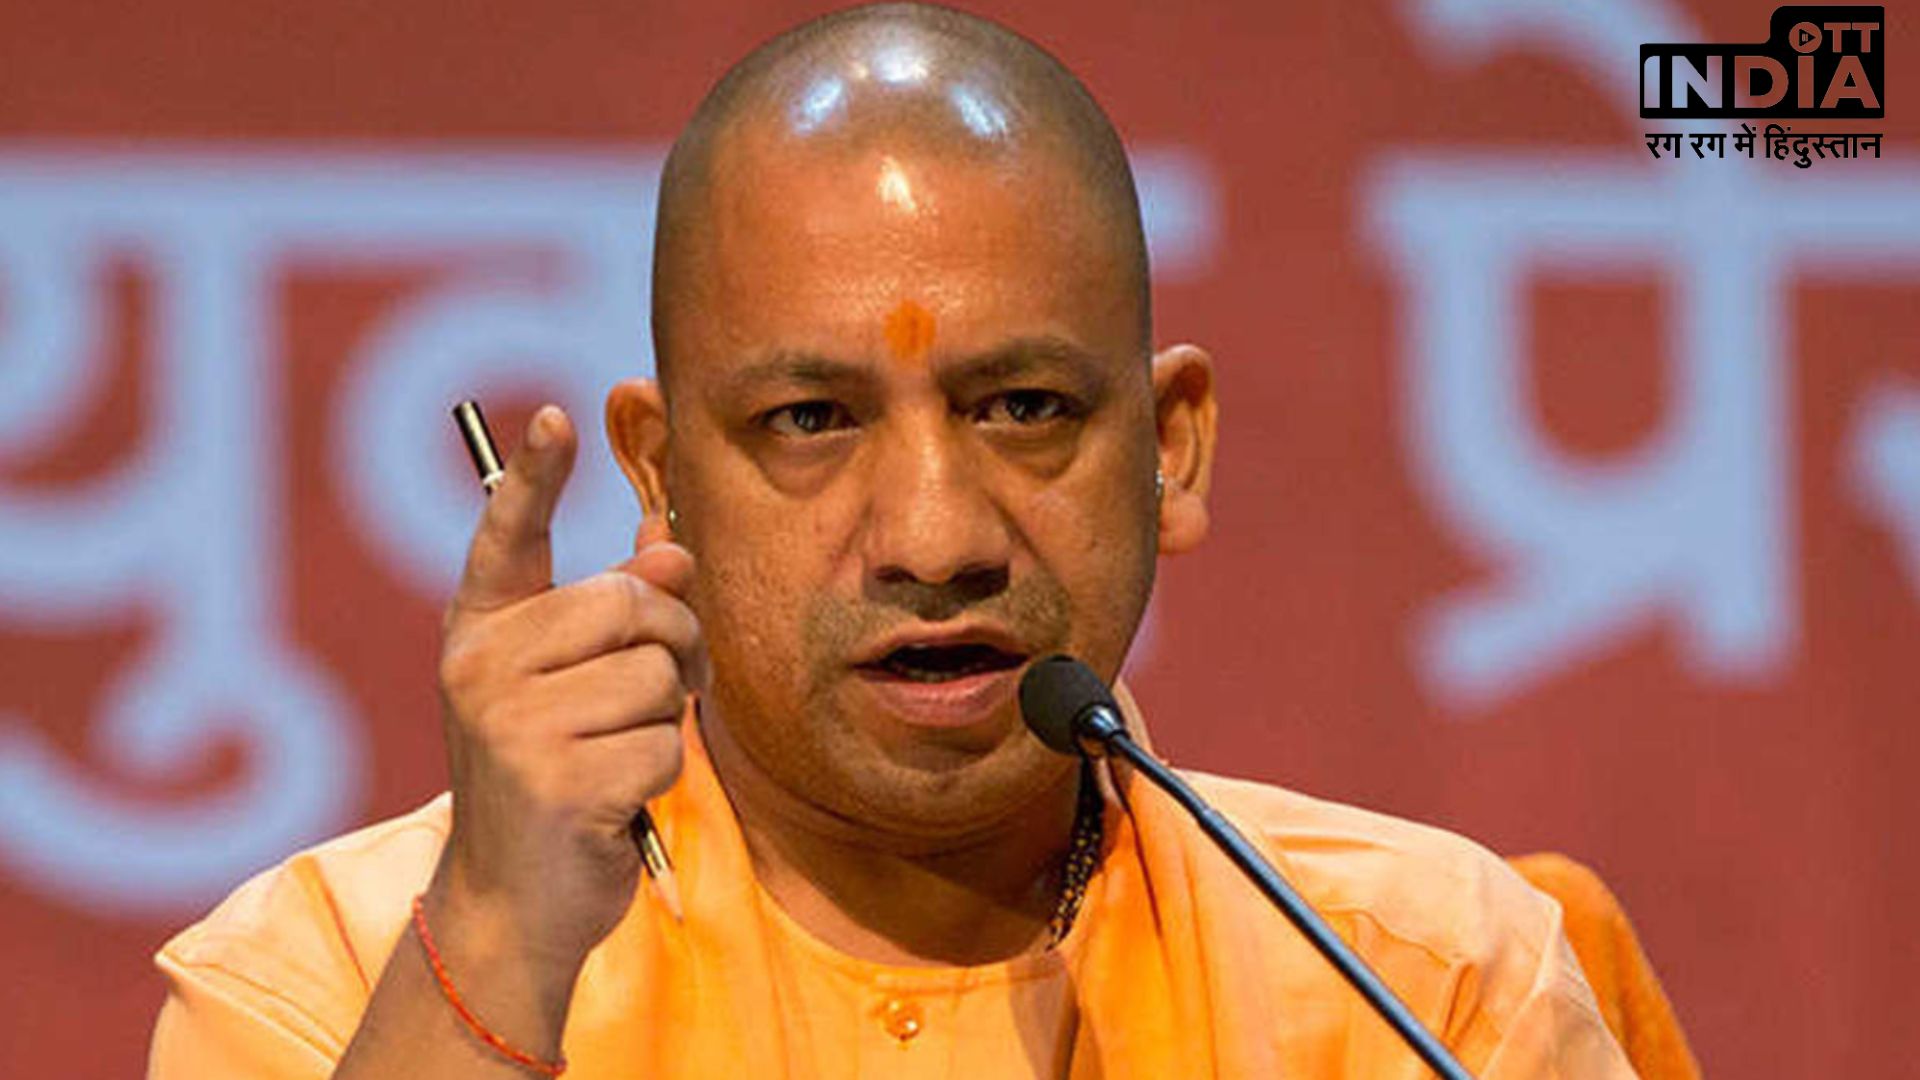 CM Yogi Adityanath Order to all DM for not happening Protest against India